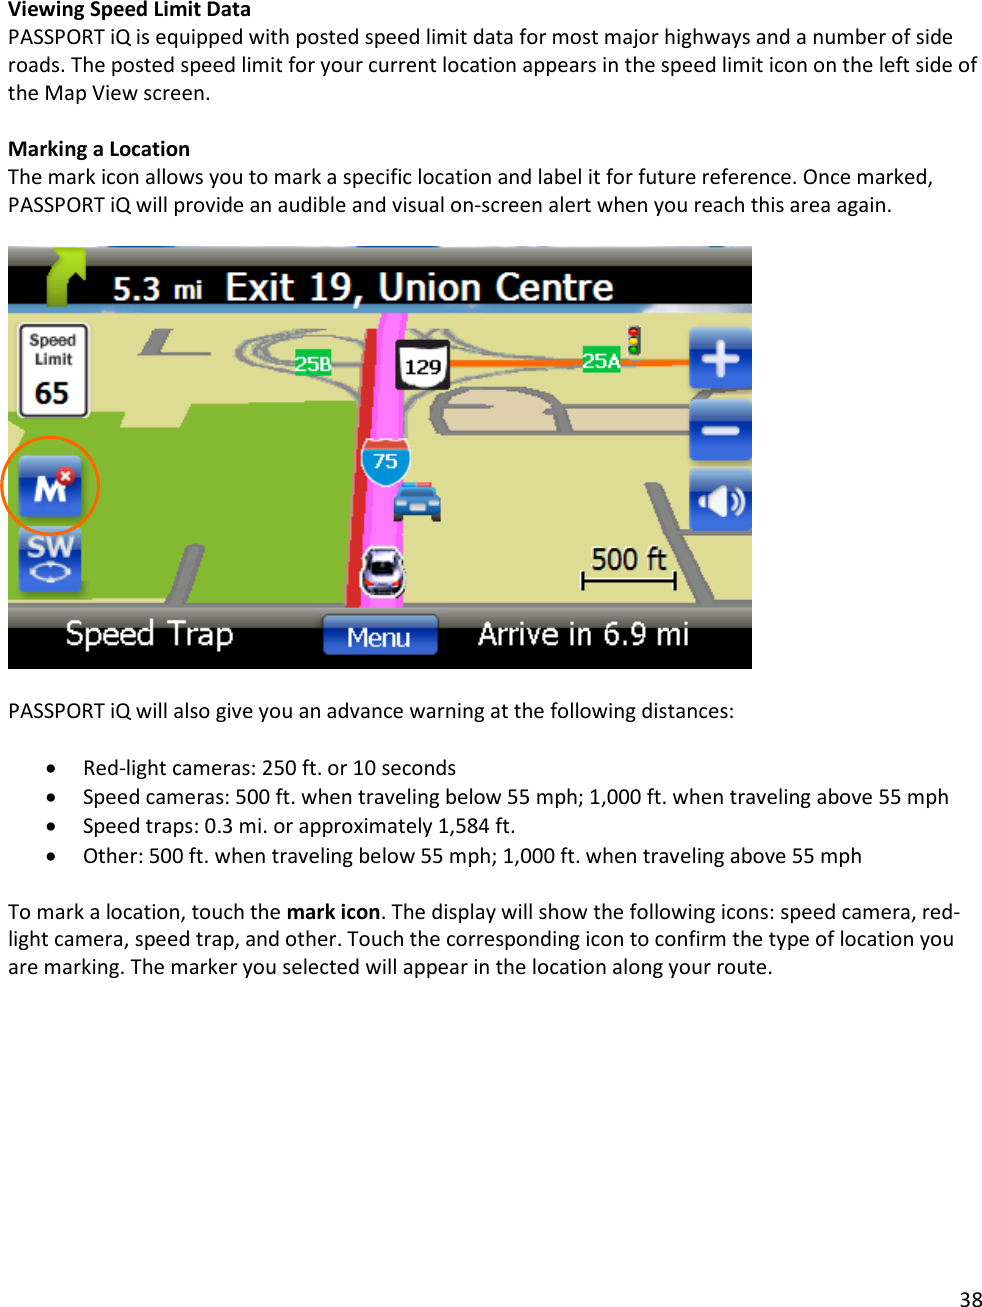 38   Viewing Speed Limit Data PASSPORT iQ is equipped with posted speed limit data for most major highways and a number of side roads. The posted speed limit for your current location appears in the speed limit icon on the left side of the Map View screen.  Marking a Location The mark icon allows you to mark a specific location and label it for future reference. Once marked, PASSPORT iQ will provide an audible and visual on-screen alert when you reach this area again.     PASSPORT iQ will also give you an advance warning at the following distances:  • Red-light cameras: 250 ft. or 10 seconds • Speed cameras: 500 ft. when traveling below 55 mph; 1,000 ft. when traveling above 55 mph • Speed traps: 0.3 mi. or approximately 1,584 ft. • Other: 500 ft. when traveling below 55 mph; 1,000 ft. when traveling above 55 mph  To mark a location, touch the mark icon. The display will show the following icons: speed camera, red-light camera, speed trap, and other. Touch the corresponding icon to confirm the type of location you are marking. The marker you selected will appear in the location along your route.  